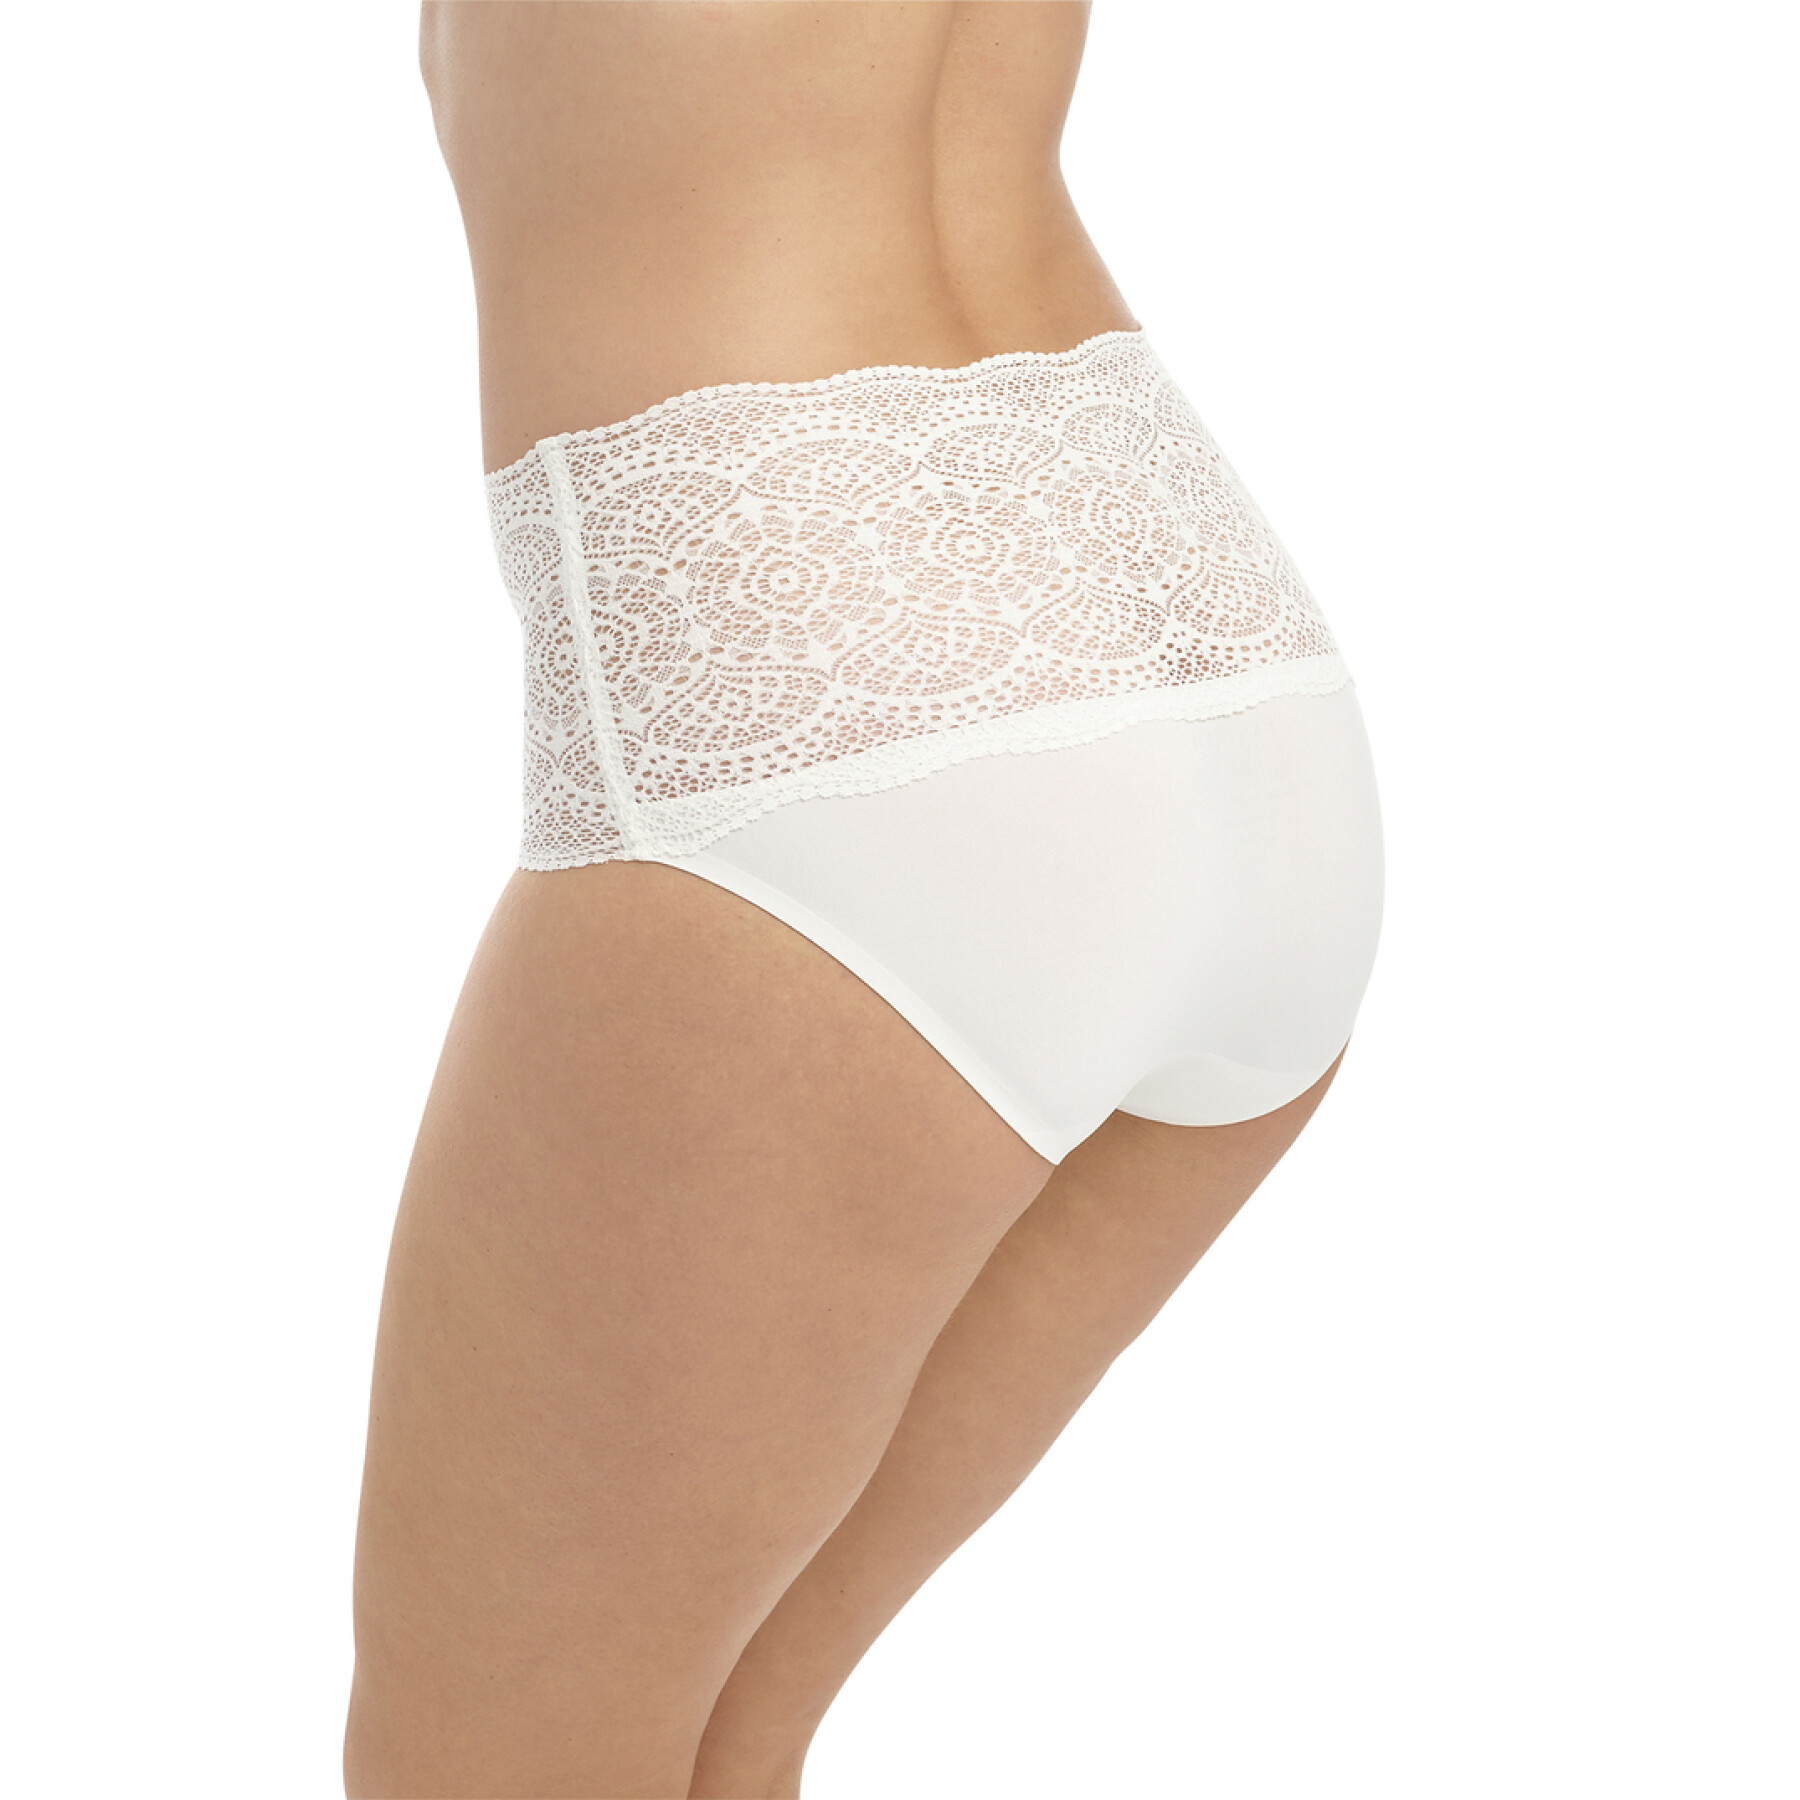 Classic invisible panties for women Fantasie Lace Ease